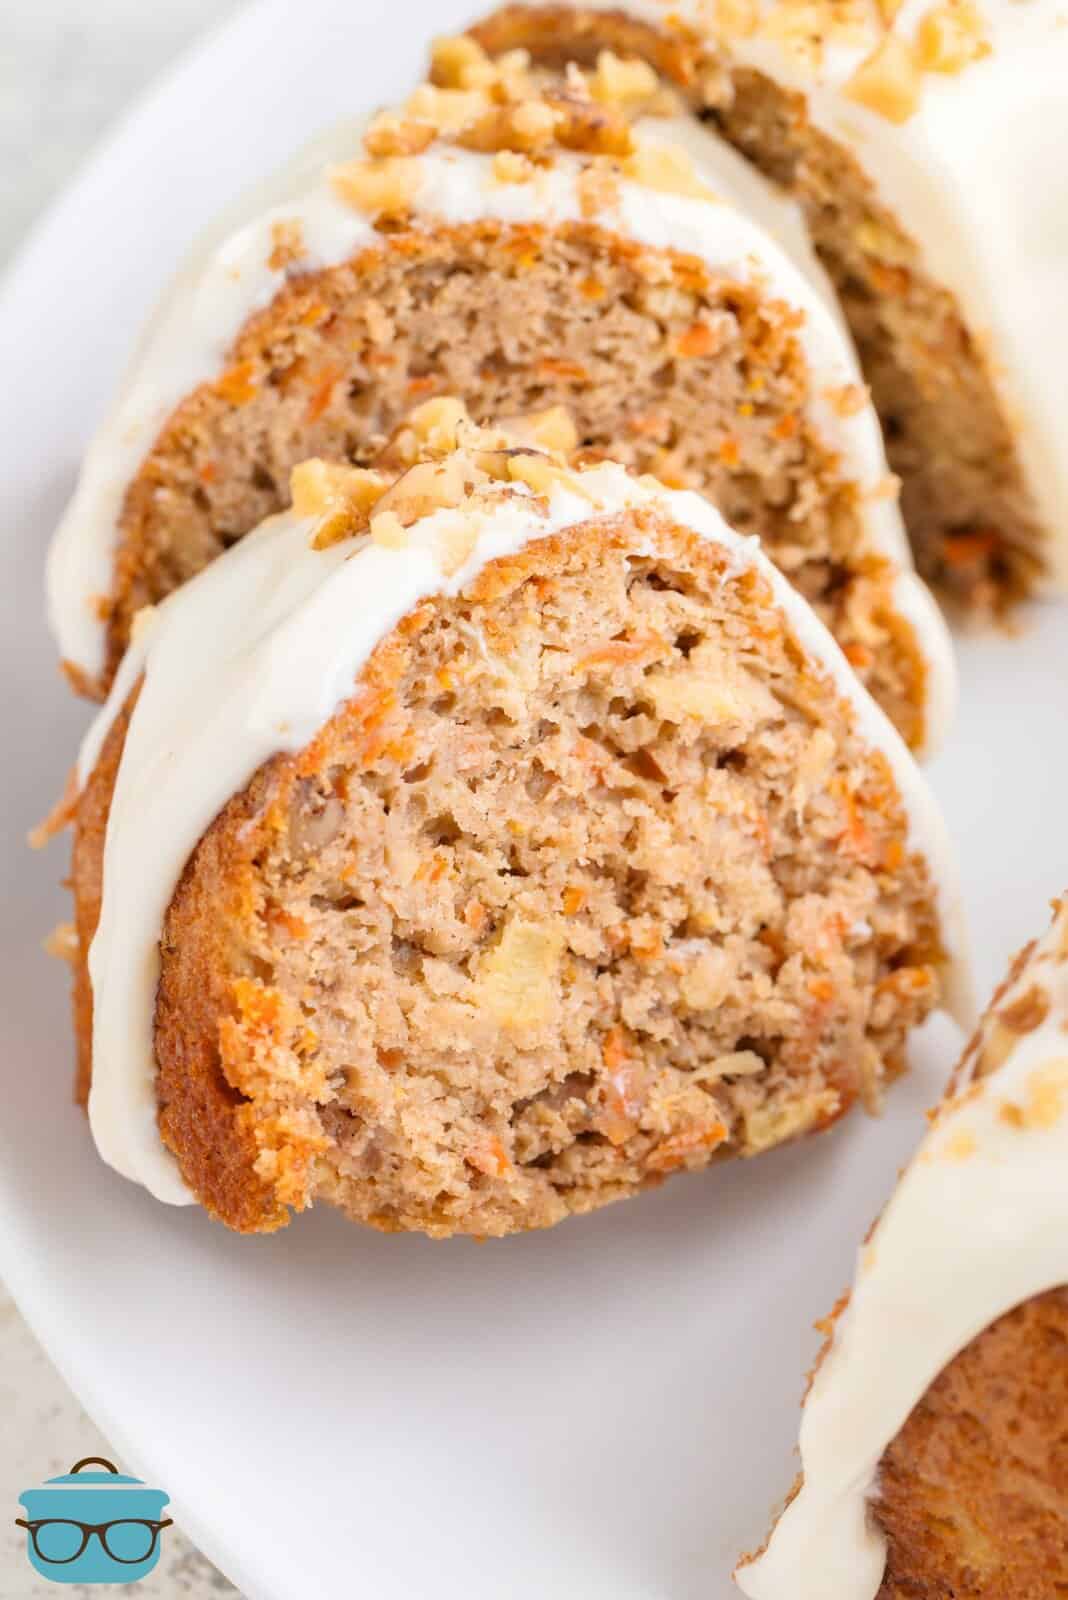 A few slices of Carrot Bundt Cake with glaze and chopped nuts on a serving plate.